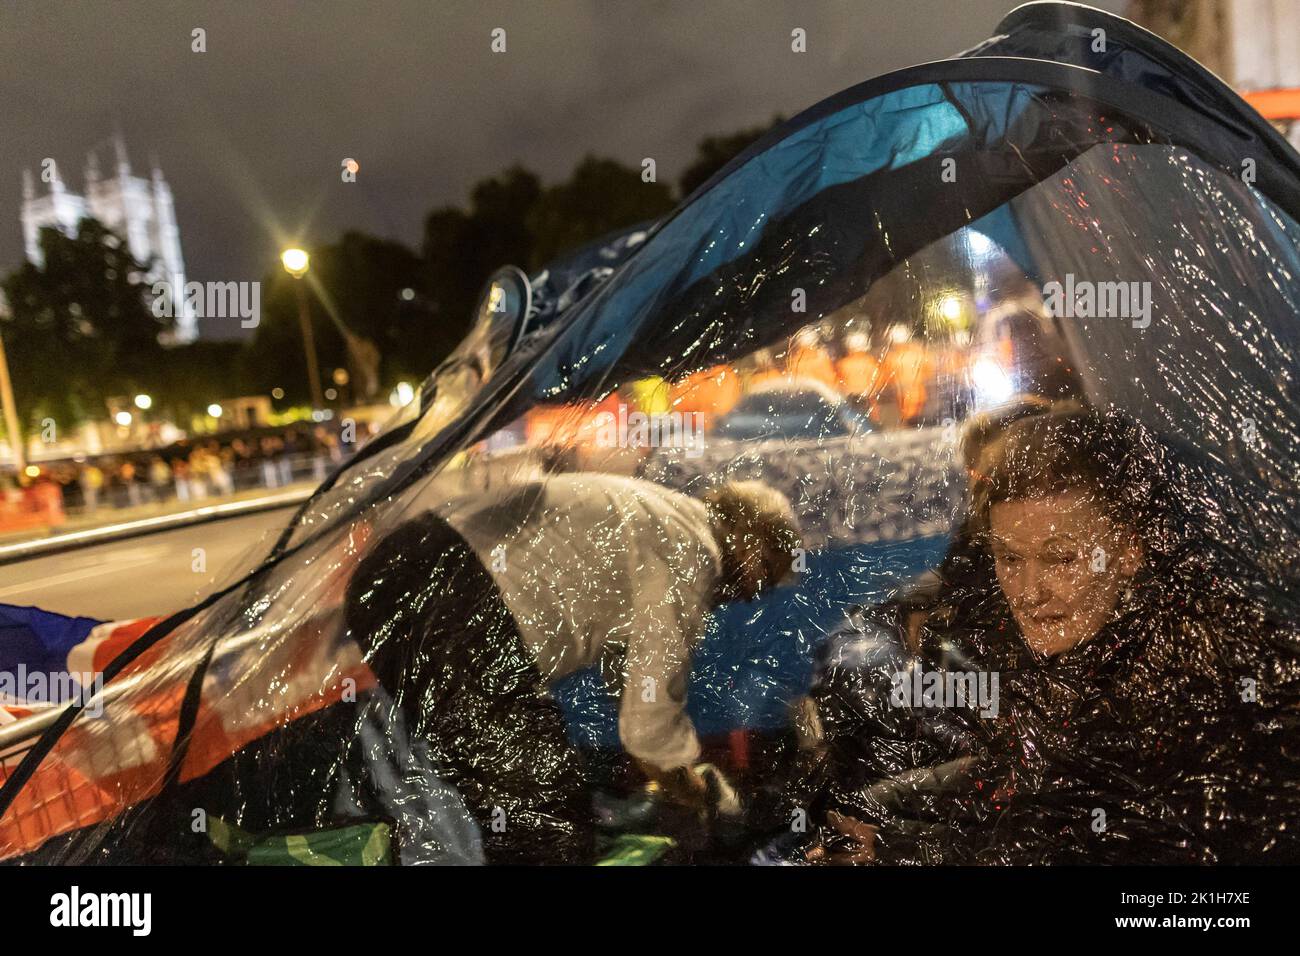 People camp outside of the Houses of Parliament ahead of the state funeral of Britain's Queen Elizabeth, in London, Britain, September 18, 2022. REUTERS/Carlos Barria Stock Photo